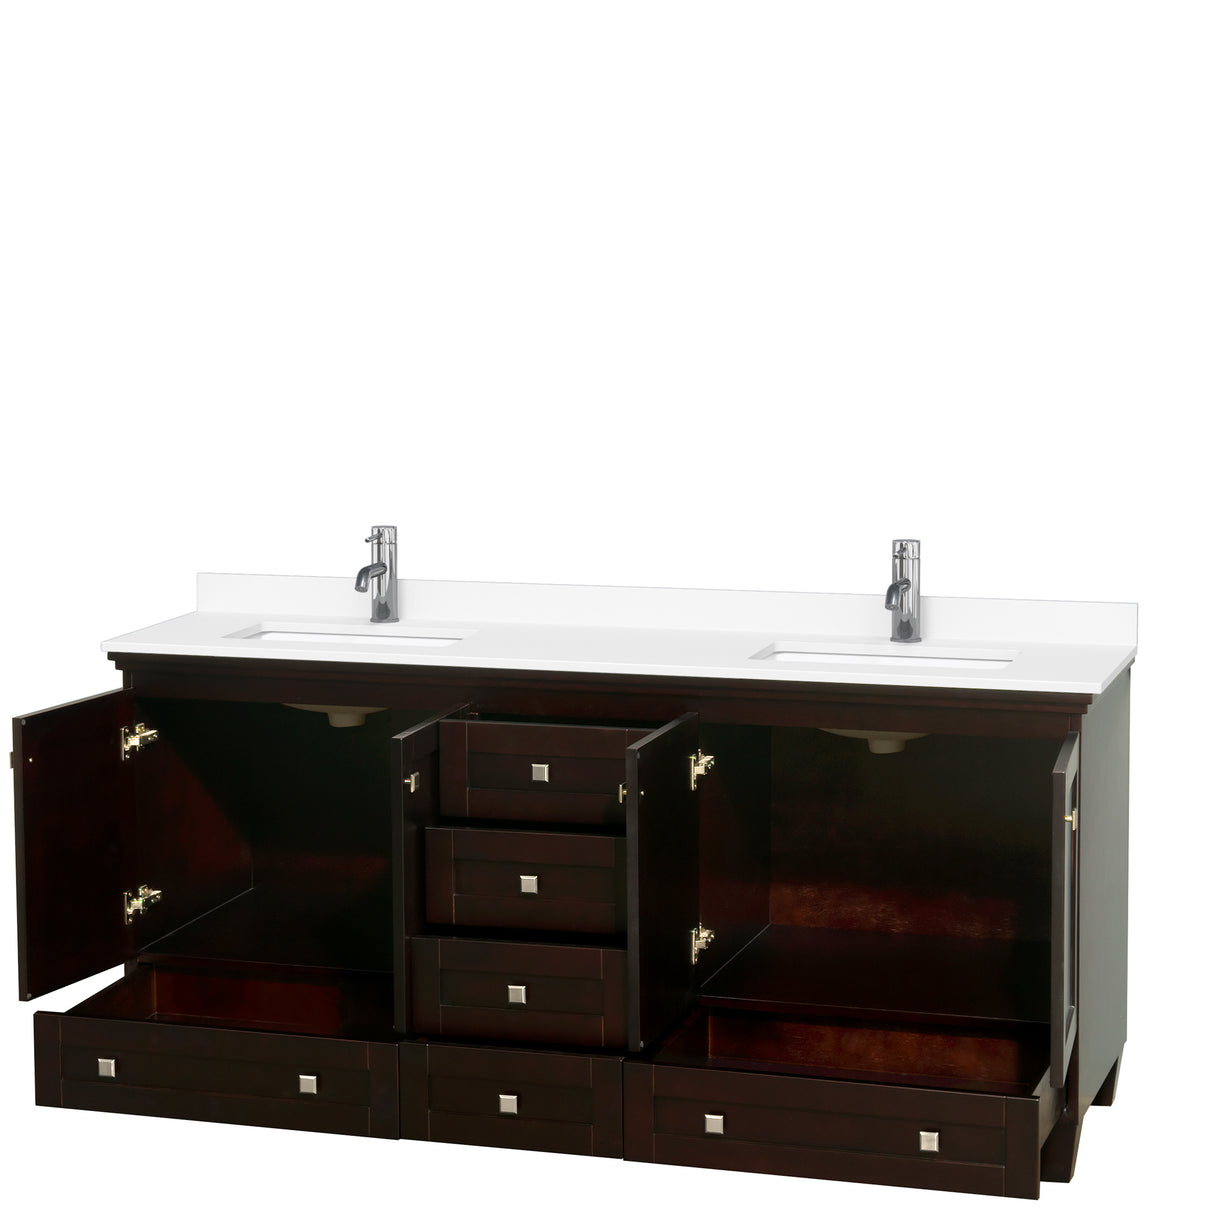 Acclaim 72 Inch Double Bathroom Vanity in Espresso White Cultured Marble Countertop Undermount Square Sinks No Mirrors